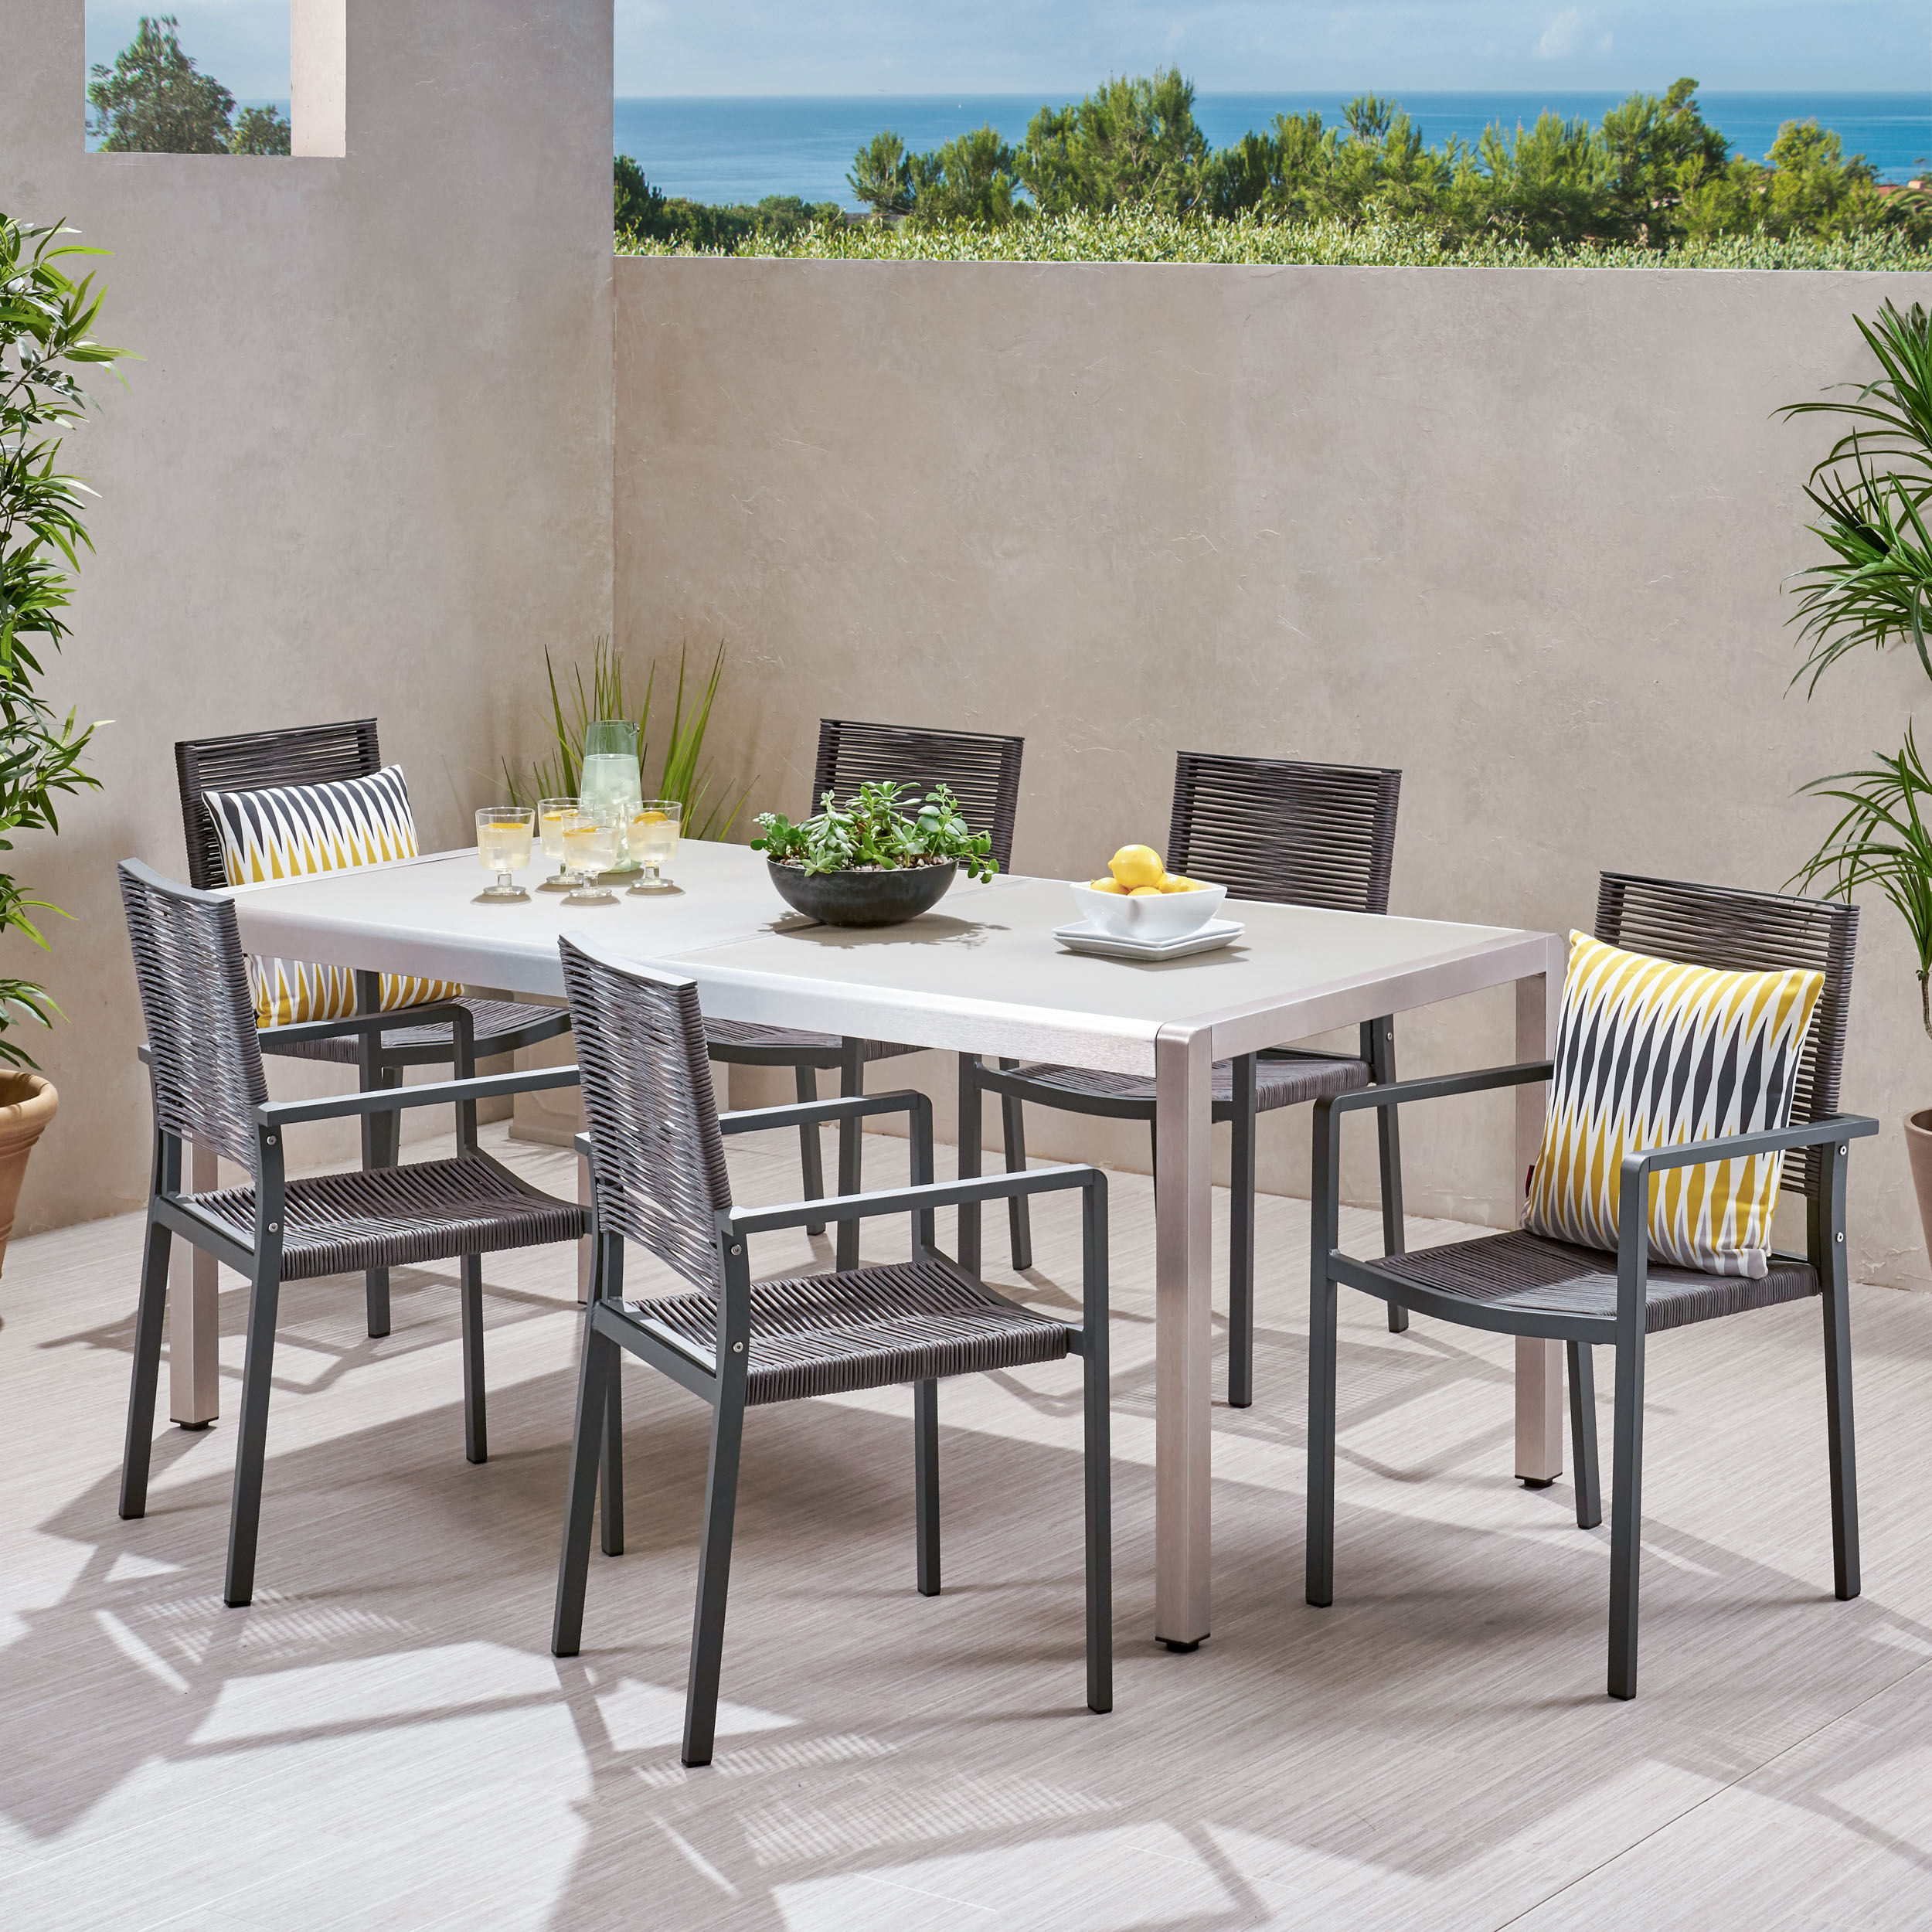 Sandy Outdoor Modern 6 Seater Aluminum Dining Set With Tempered Glass Table Top - Gray + Silver + Dark Gray